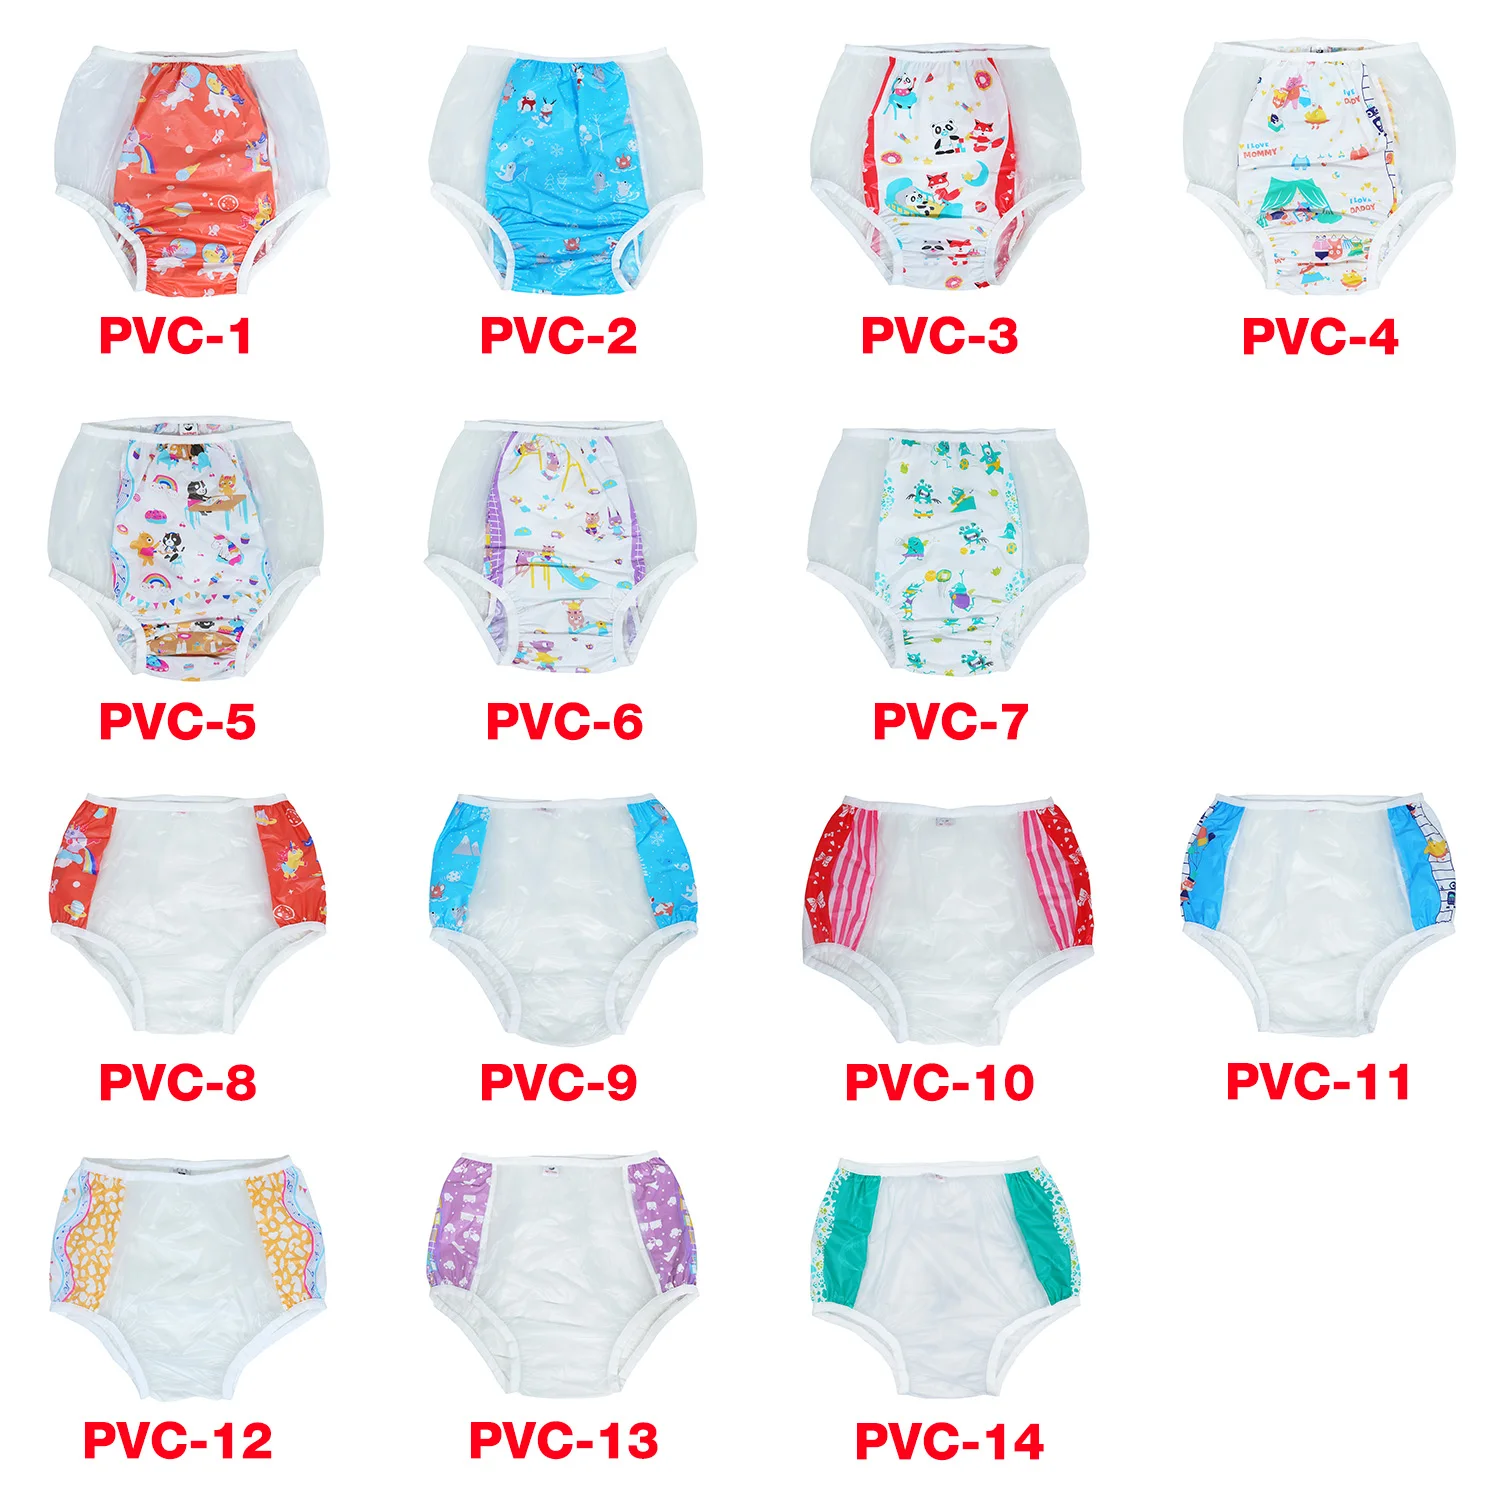 

ABDL adult diaper pvc reusable baby pant diapers onesize plastic bikini bottoms DDLG adult baby new underwear blue diapers